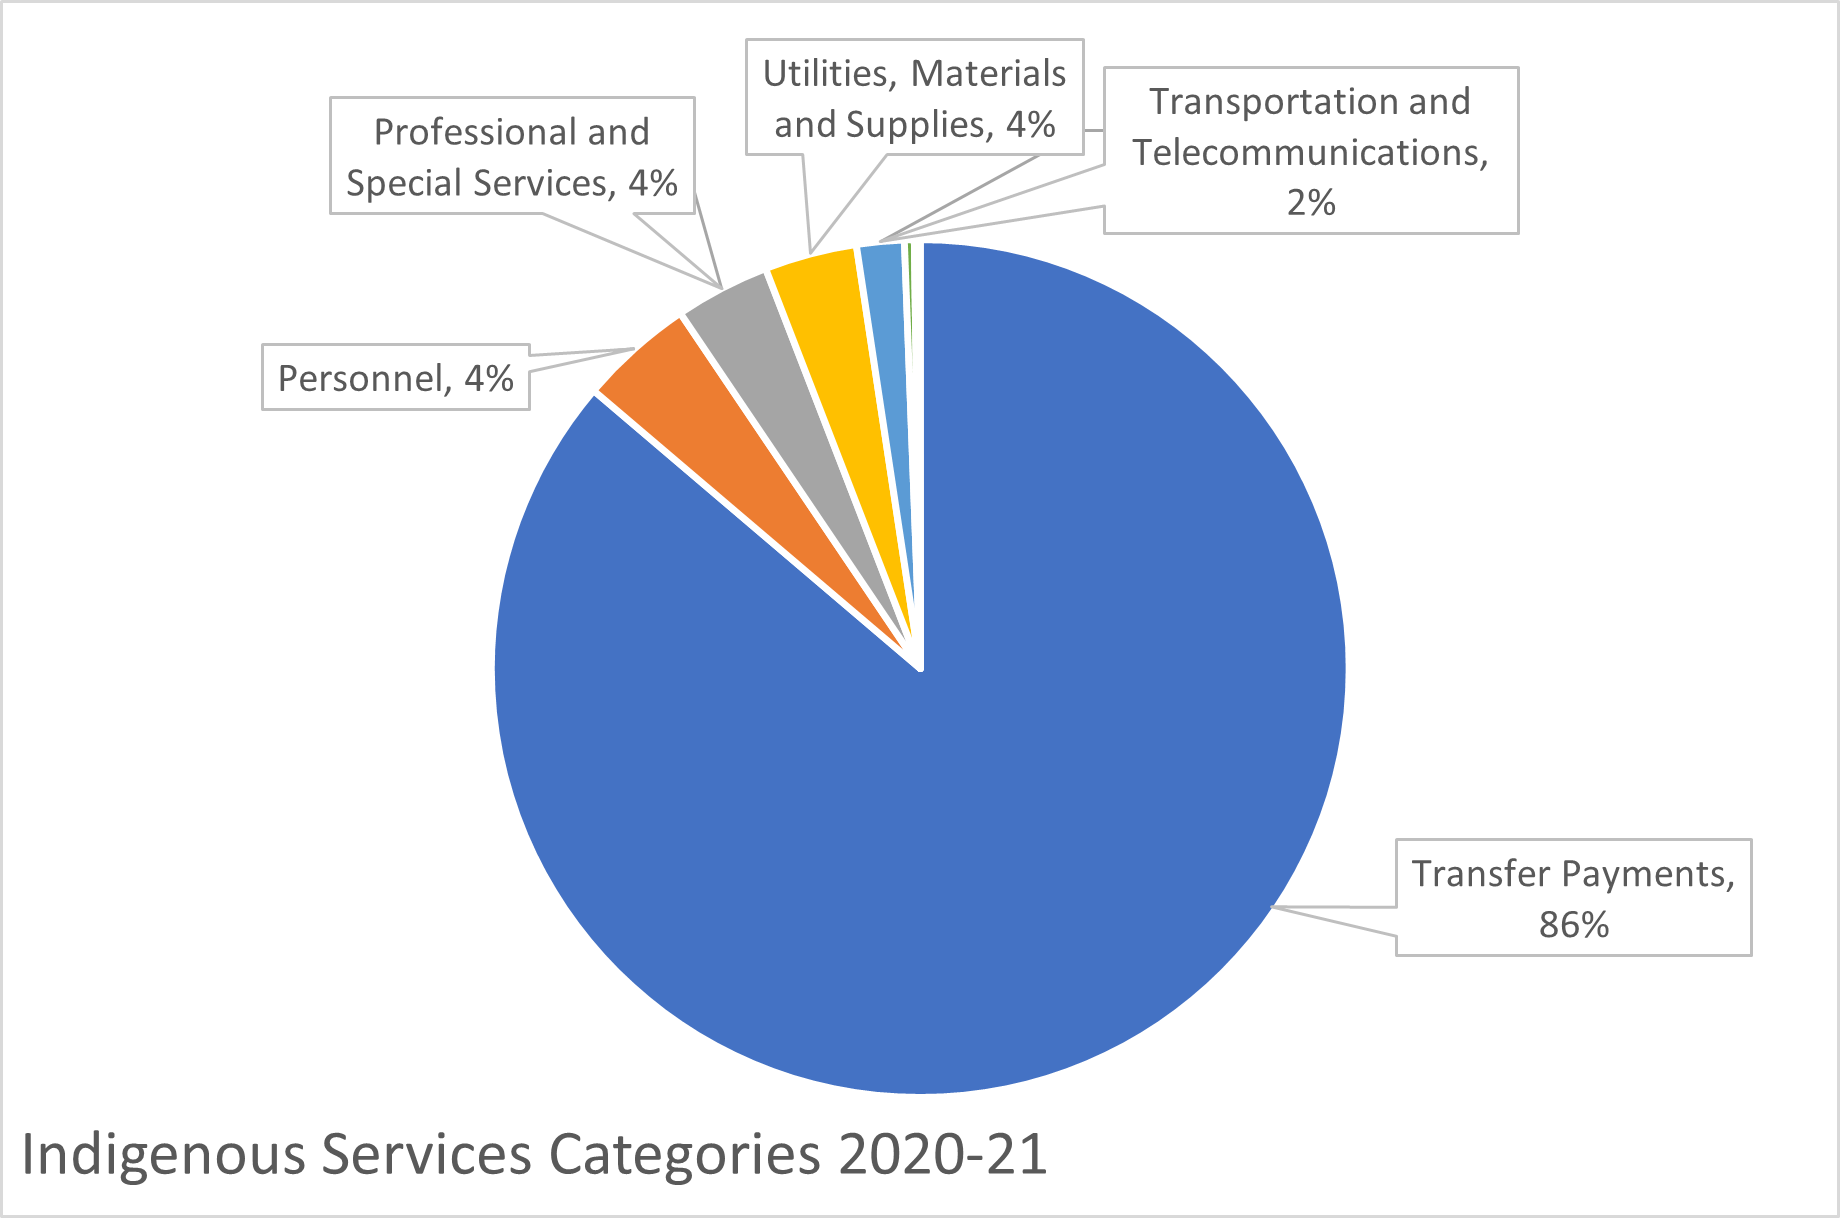 In this pie chart, 86% of total ISC spending goes to Transfer Payment. Only 4% is spent on Personnel, 4% on Professional and Special Services, and 2% on Transportation and Communications.